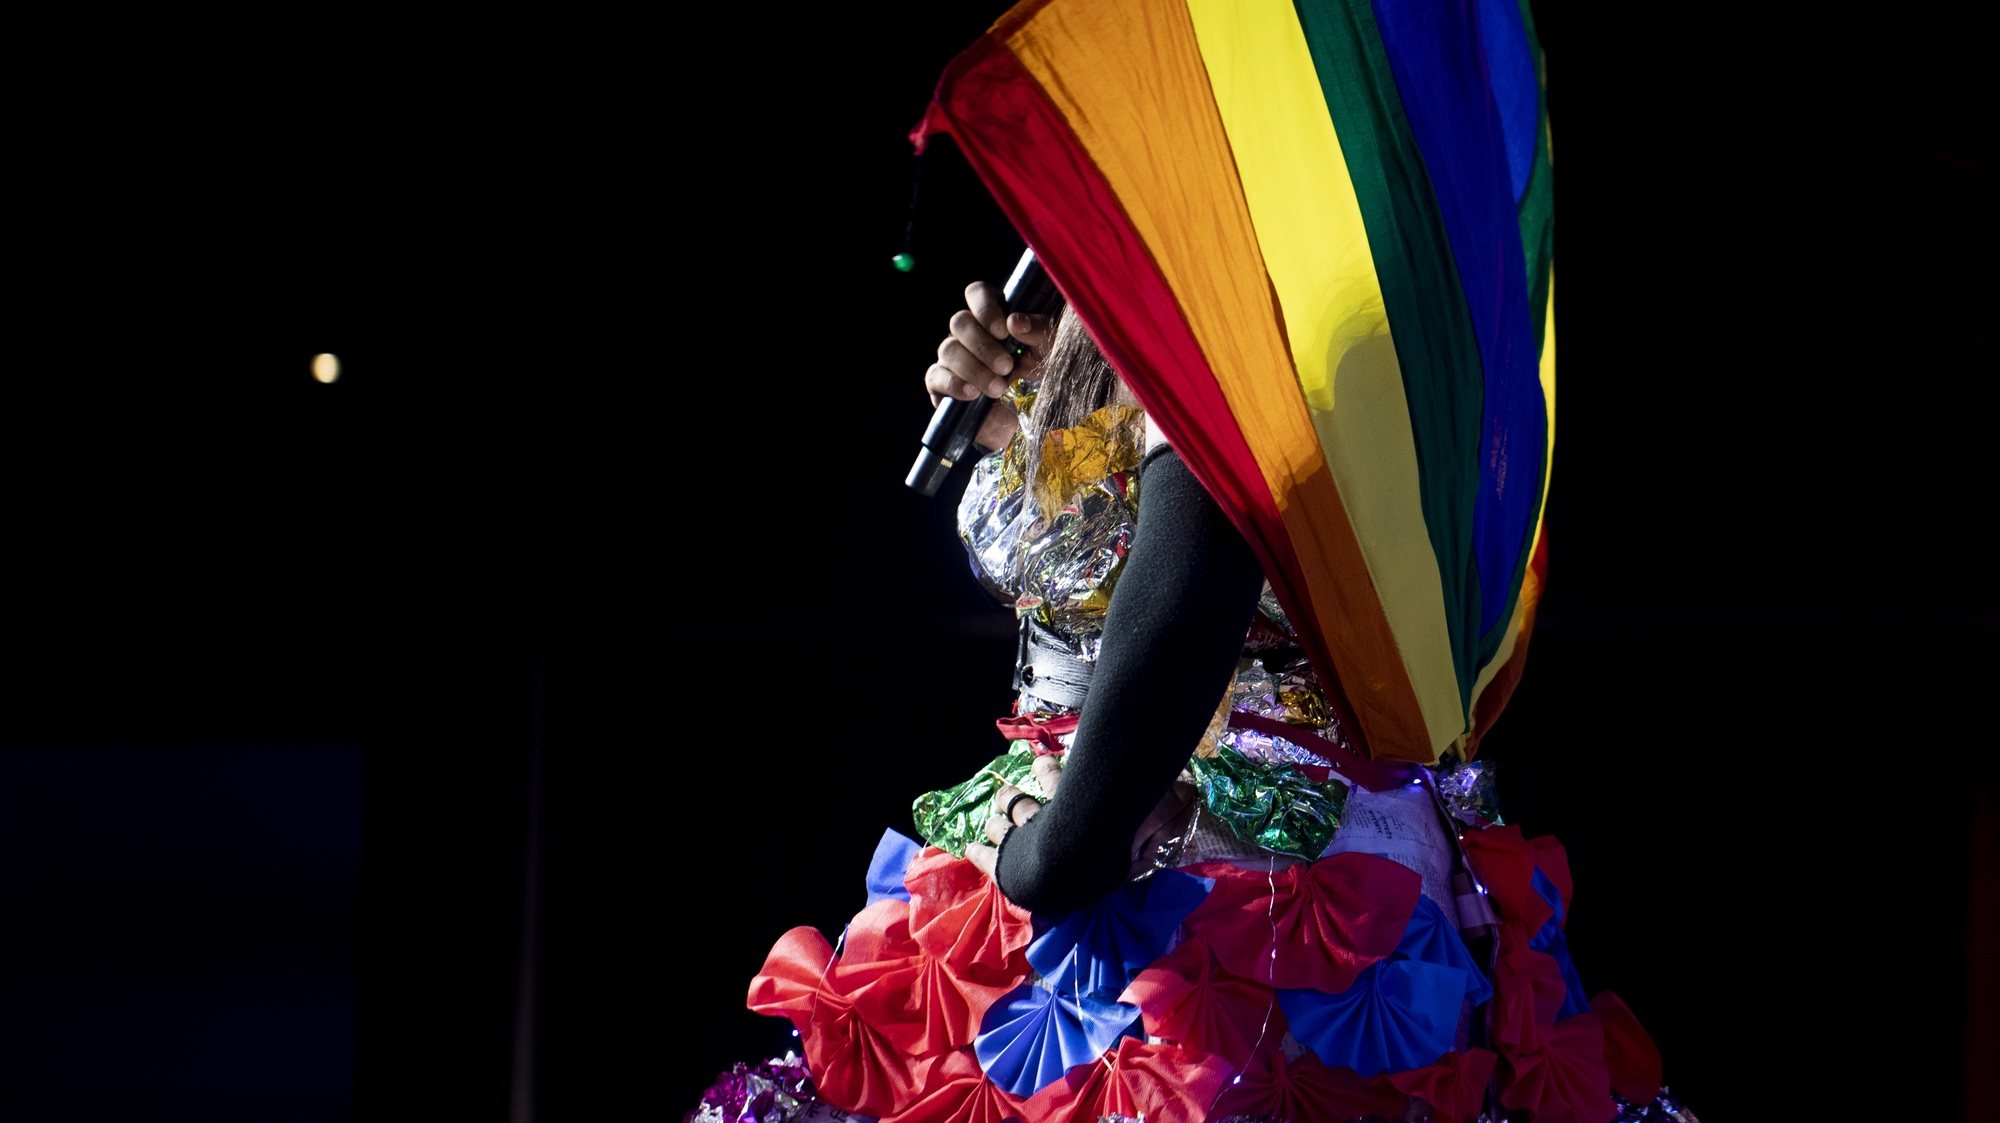 epa10695127 A participant wearing an outfit with a rainbow flag performs during a Drag Show in Kathmandu, Nepal, 16 June 2023. Hundreds of Nepalese youths and LGBTQIA activists participated in the Drag Show to honor the Pride month of June.  EPA/NARENDRA SHRESTHA